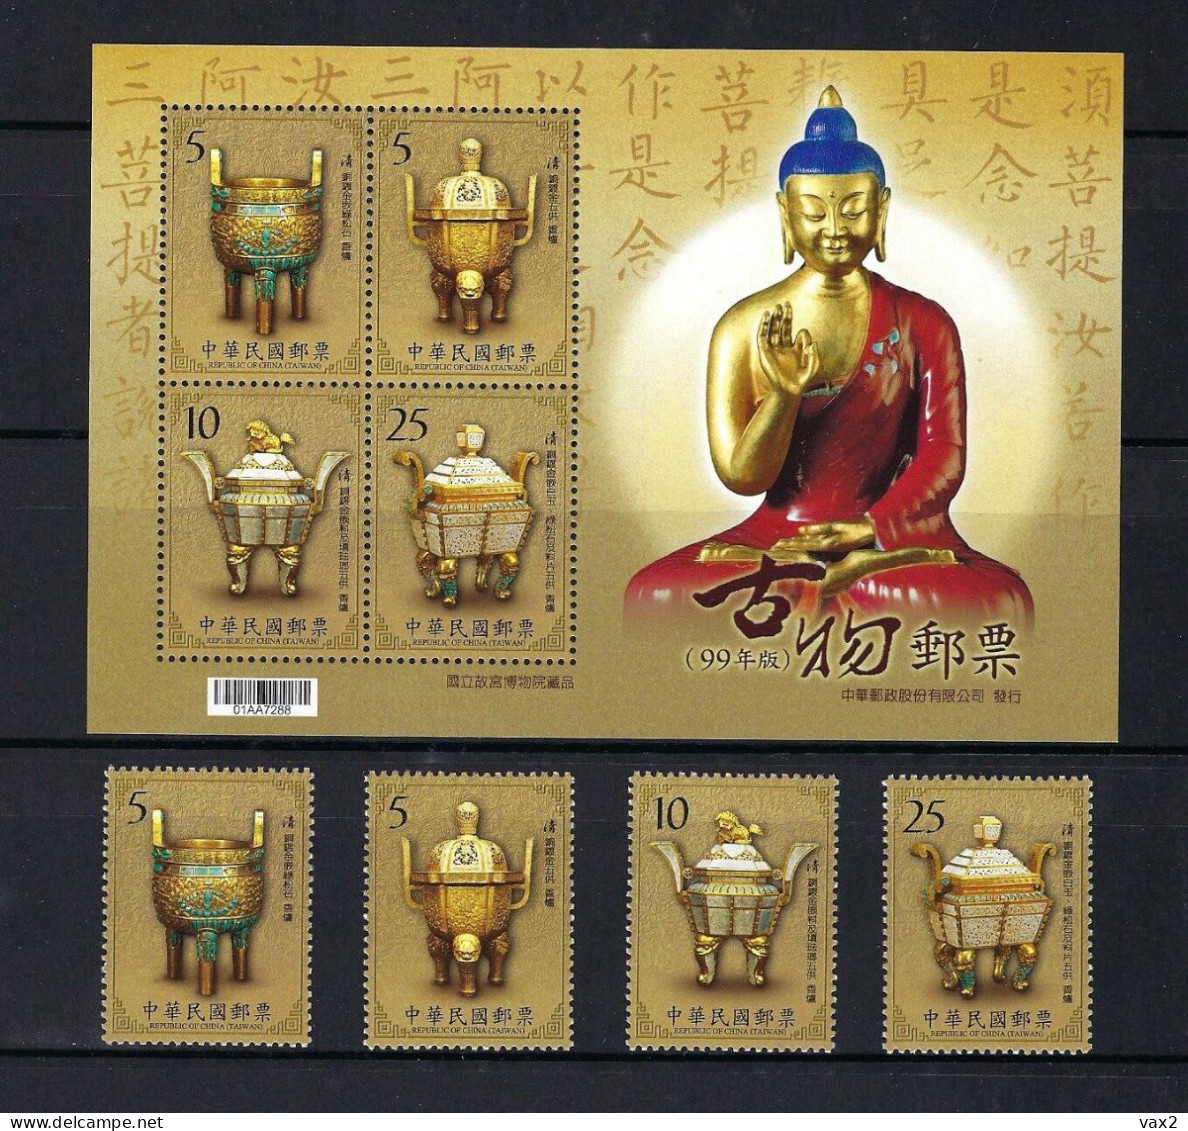 Taiwan 2010 S#3968-3971a Ancient Chinese Art Treasures Set+M/S MNH Buddhism Treasure - Unused Stamps